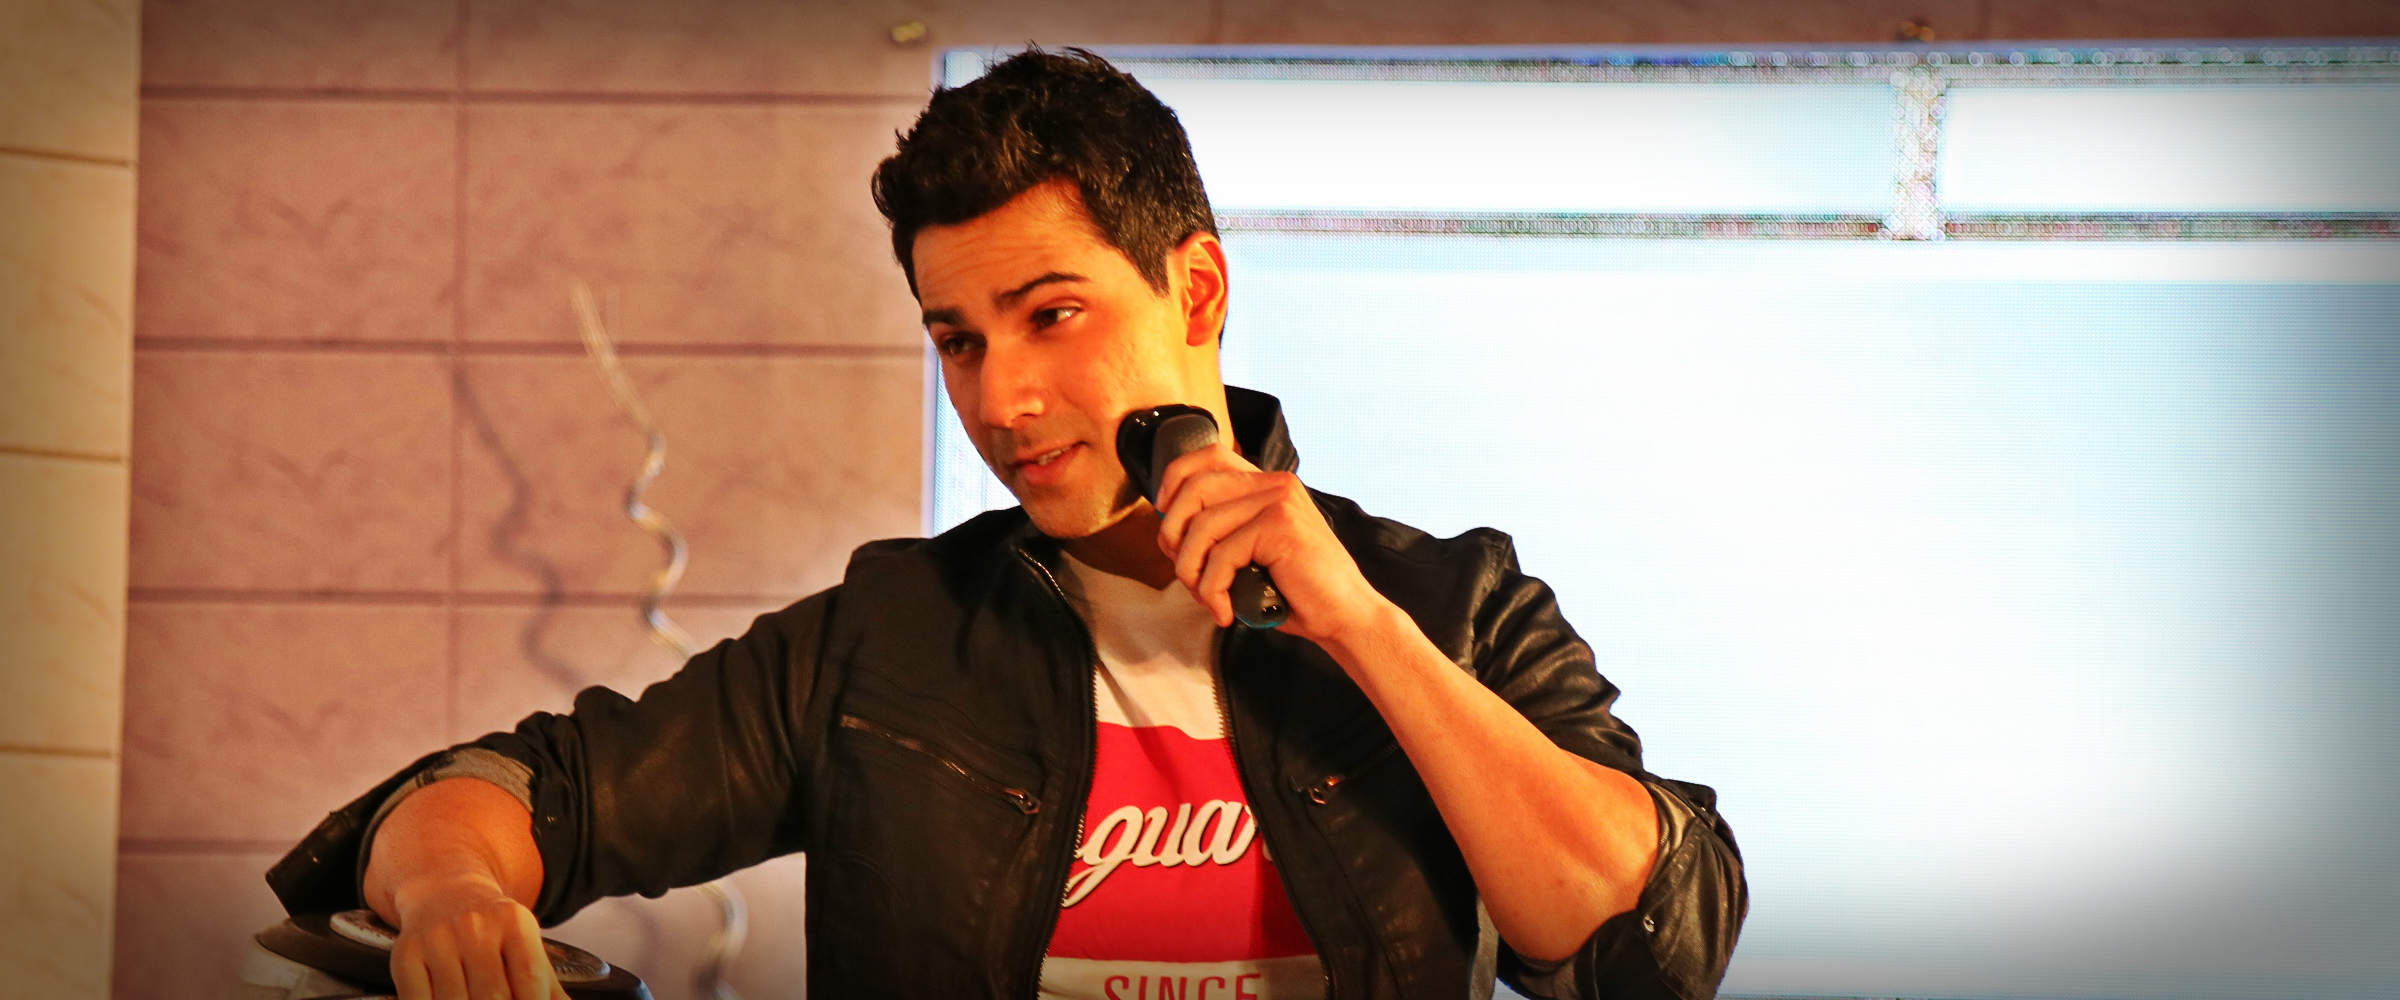 Actor and Brand Ambassador for Philips India's Shaving category Varun Dhawan